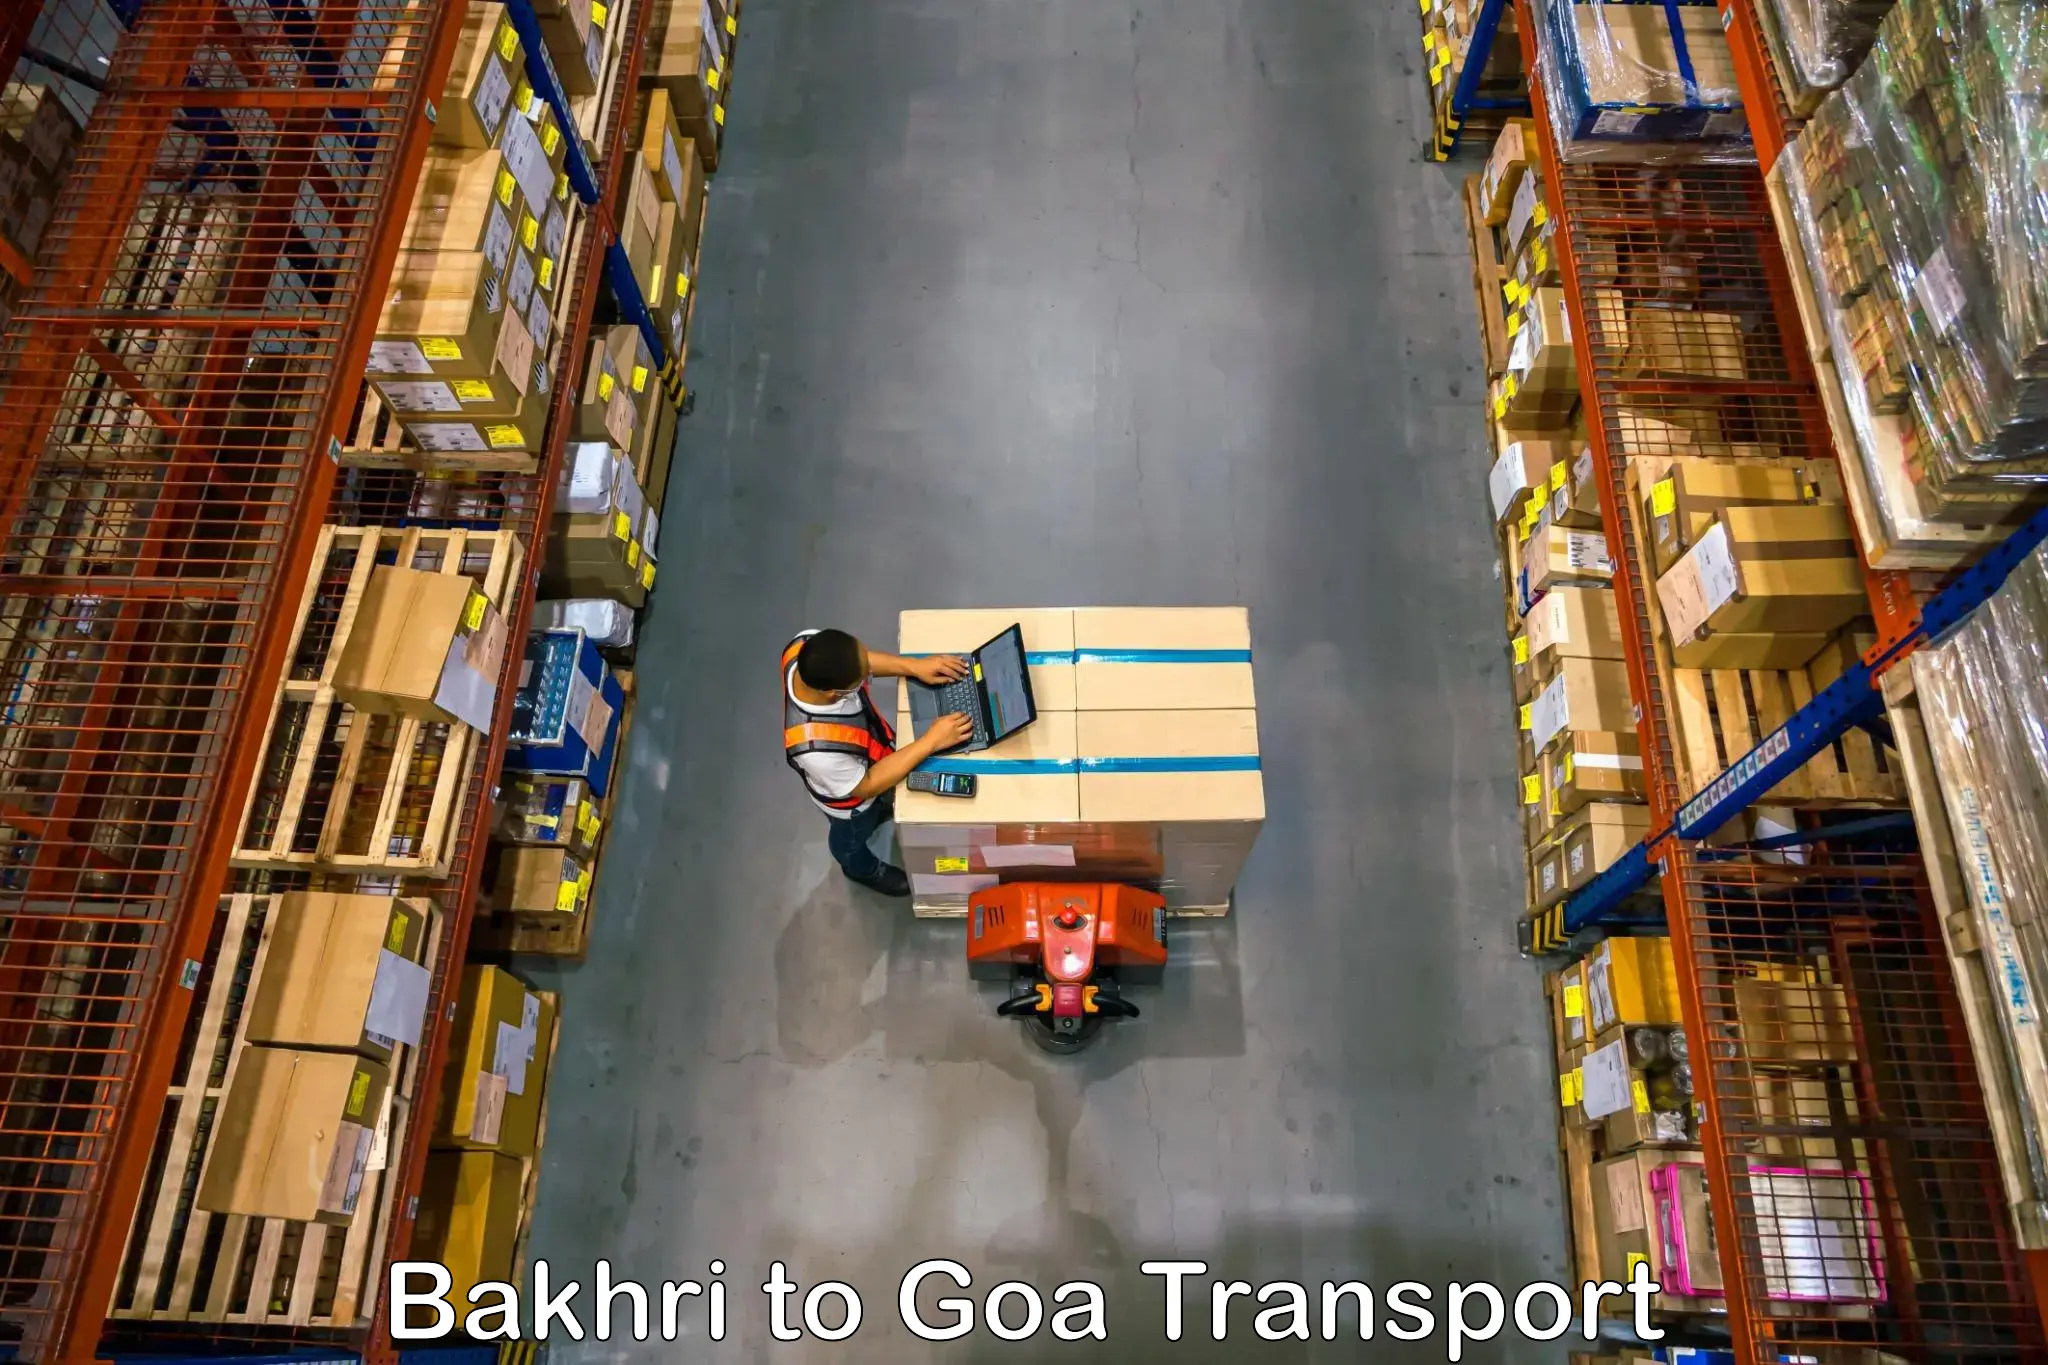 Air freight transport services in Bakhri to Mormugao Port